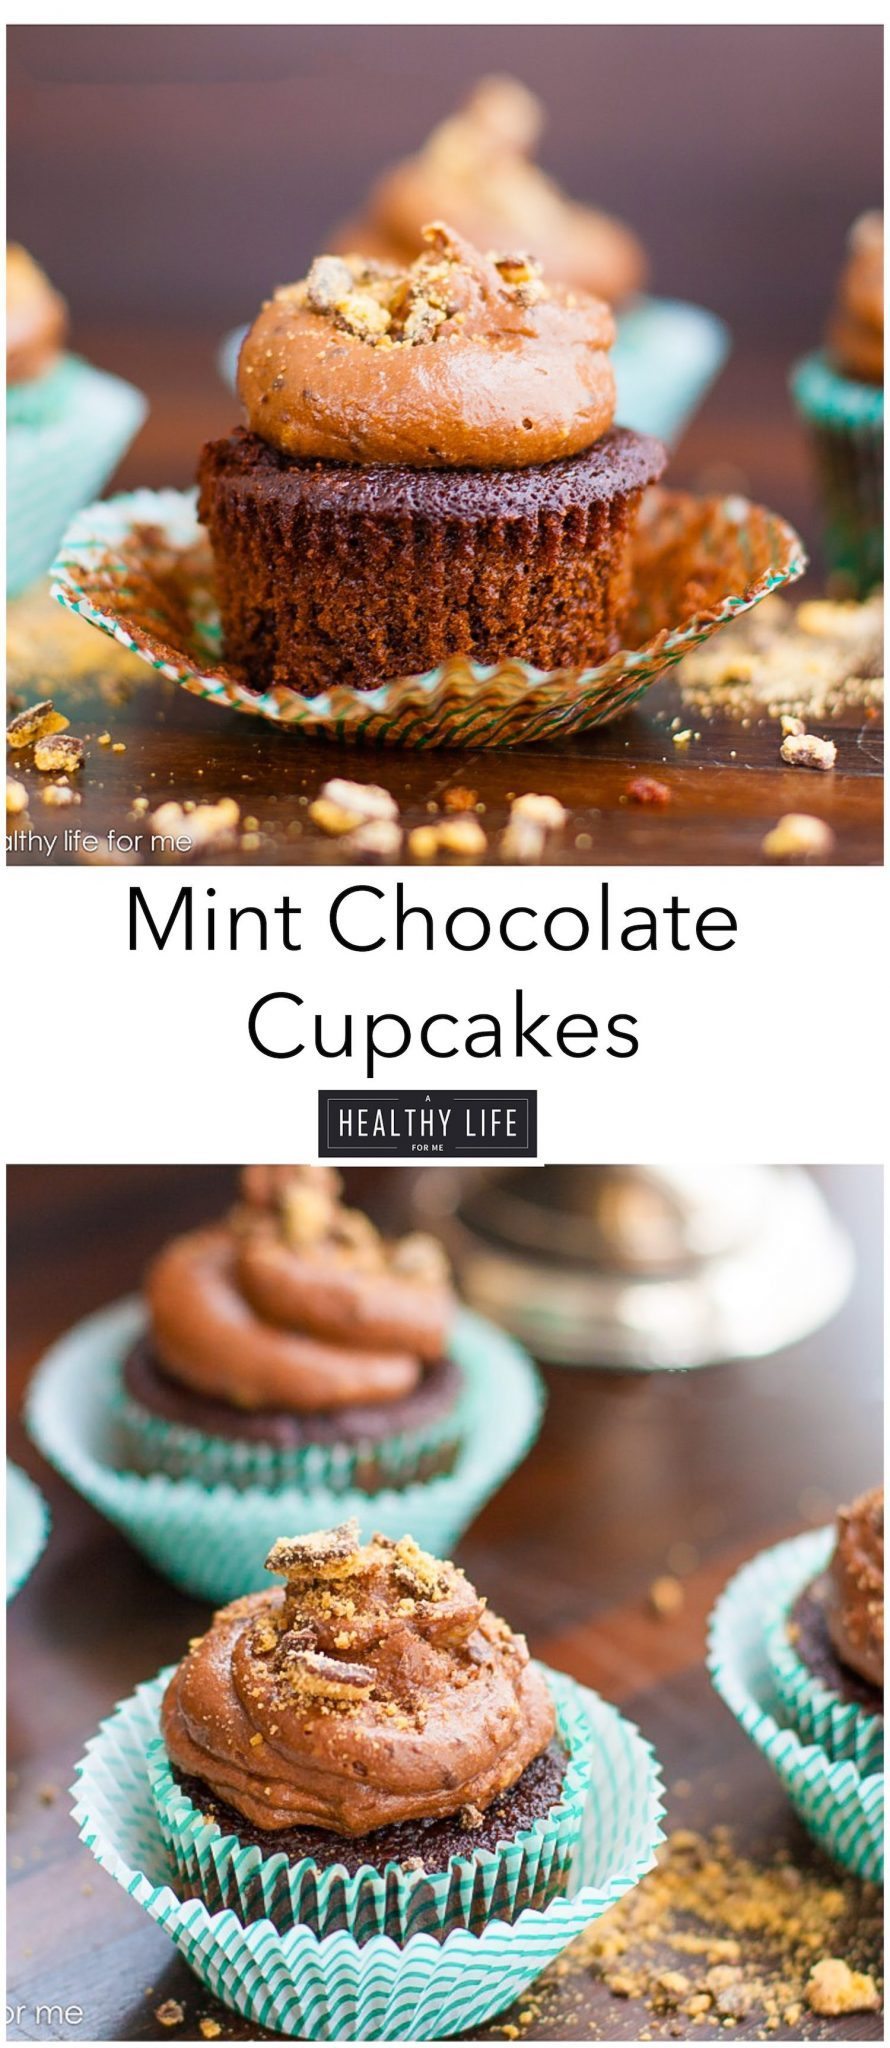 Mint Chocolate Cupcake Recipe made with Girl Scout Cookies | ahealthylifeforme.com